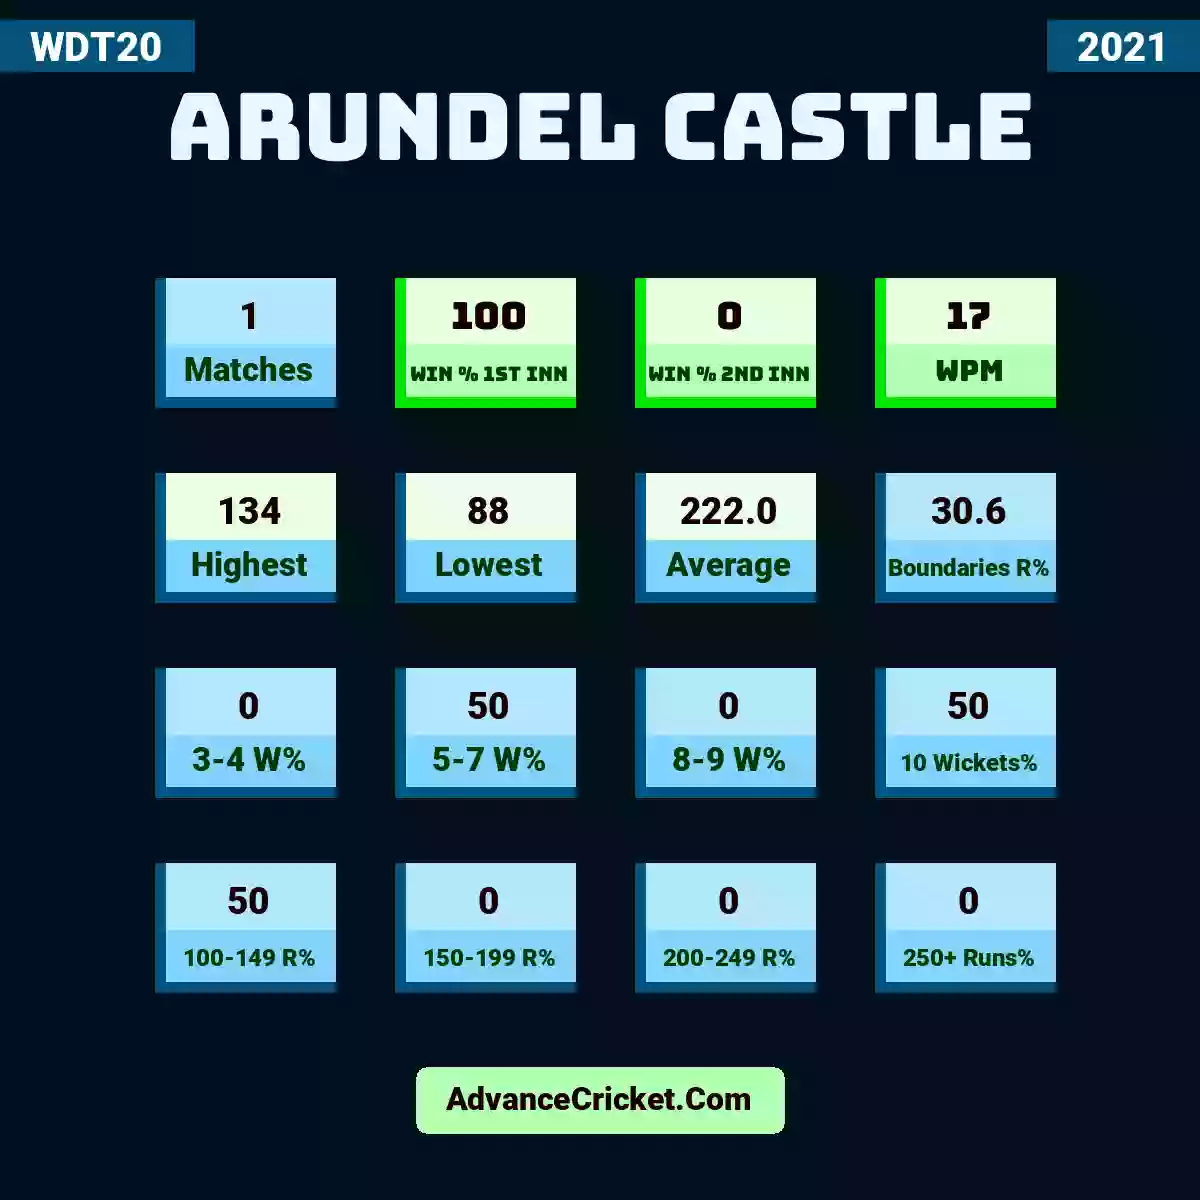 Image showing Arundel Castle with Matches: 1, Win % 1st Inn: 100, Win % 2nd Inn: 0, WPM: 17, Highest: 134, Lowest: 88, Average: 222.0, Boundaries R%: 30.6, 3-4 W%: 0, 5-7 W%: 50, 8-9 W%: 0, 10 Wickets%: 50, 100-149 R%: 50, 150-199 R%: 0, 200-249 R%: 0, 250+ Runs%: 0.